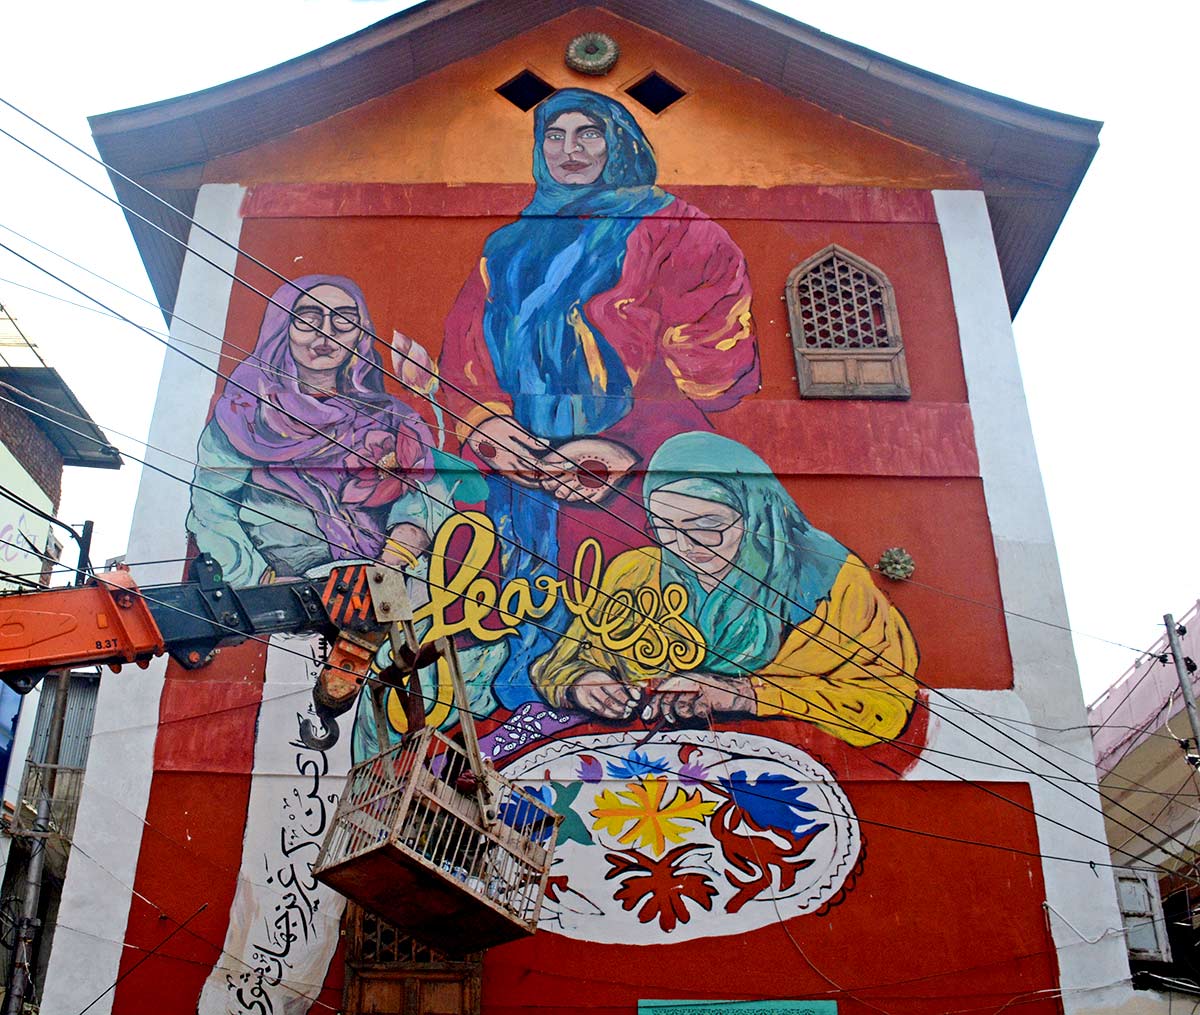 What Are These Kashmiri Women Painting?